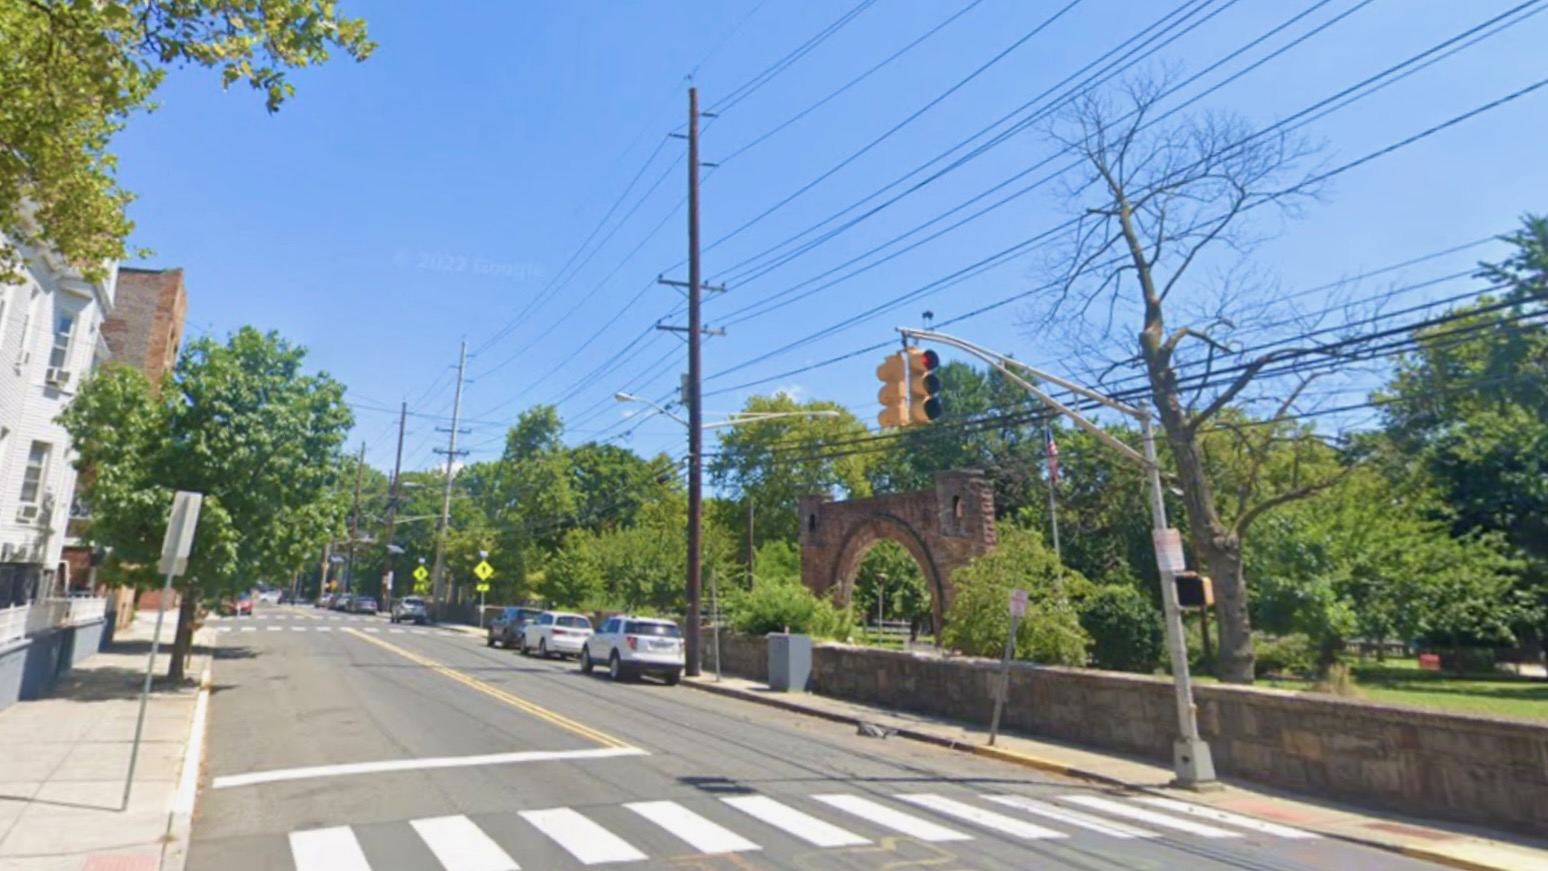 Jersey City Awarded $8.1 Million for Traffic Safety Improvements at 33 Intersections along Summit Avenue